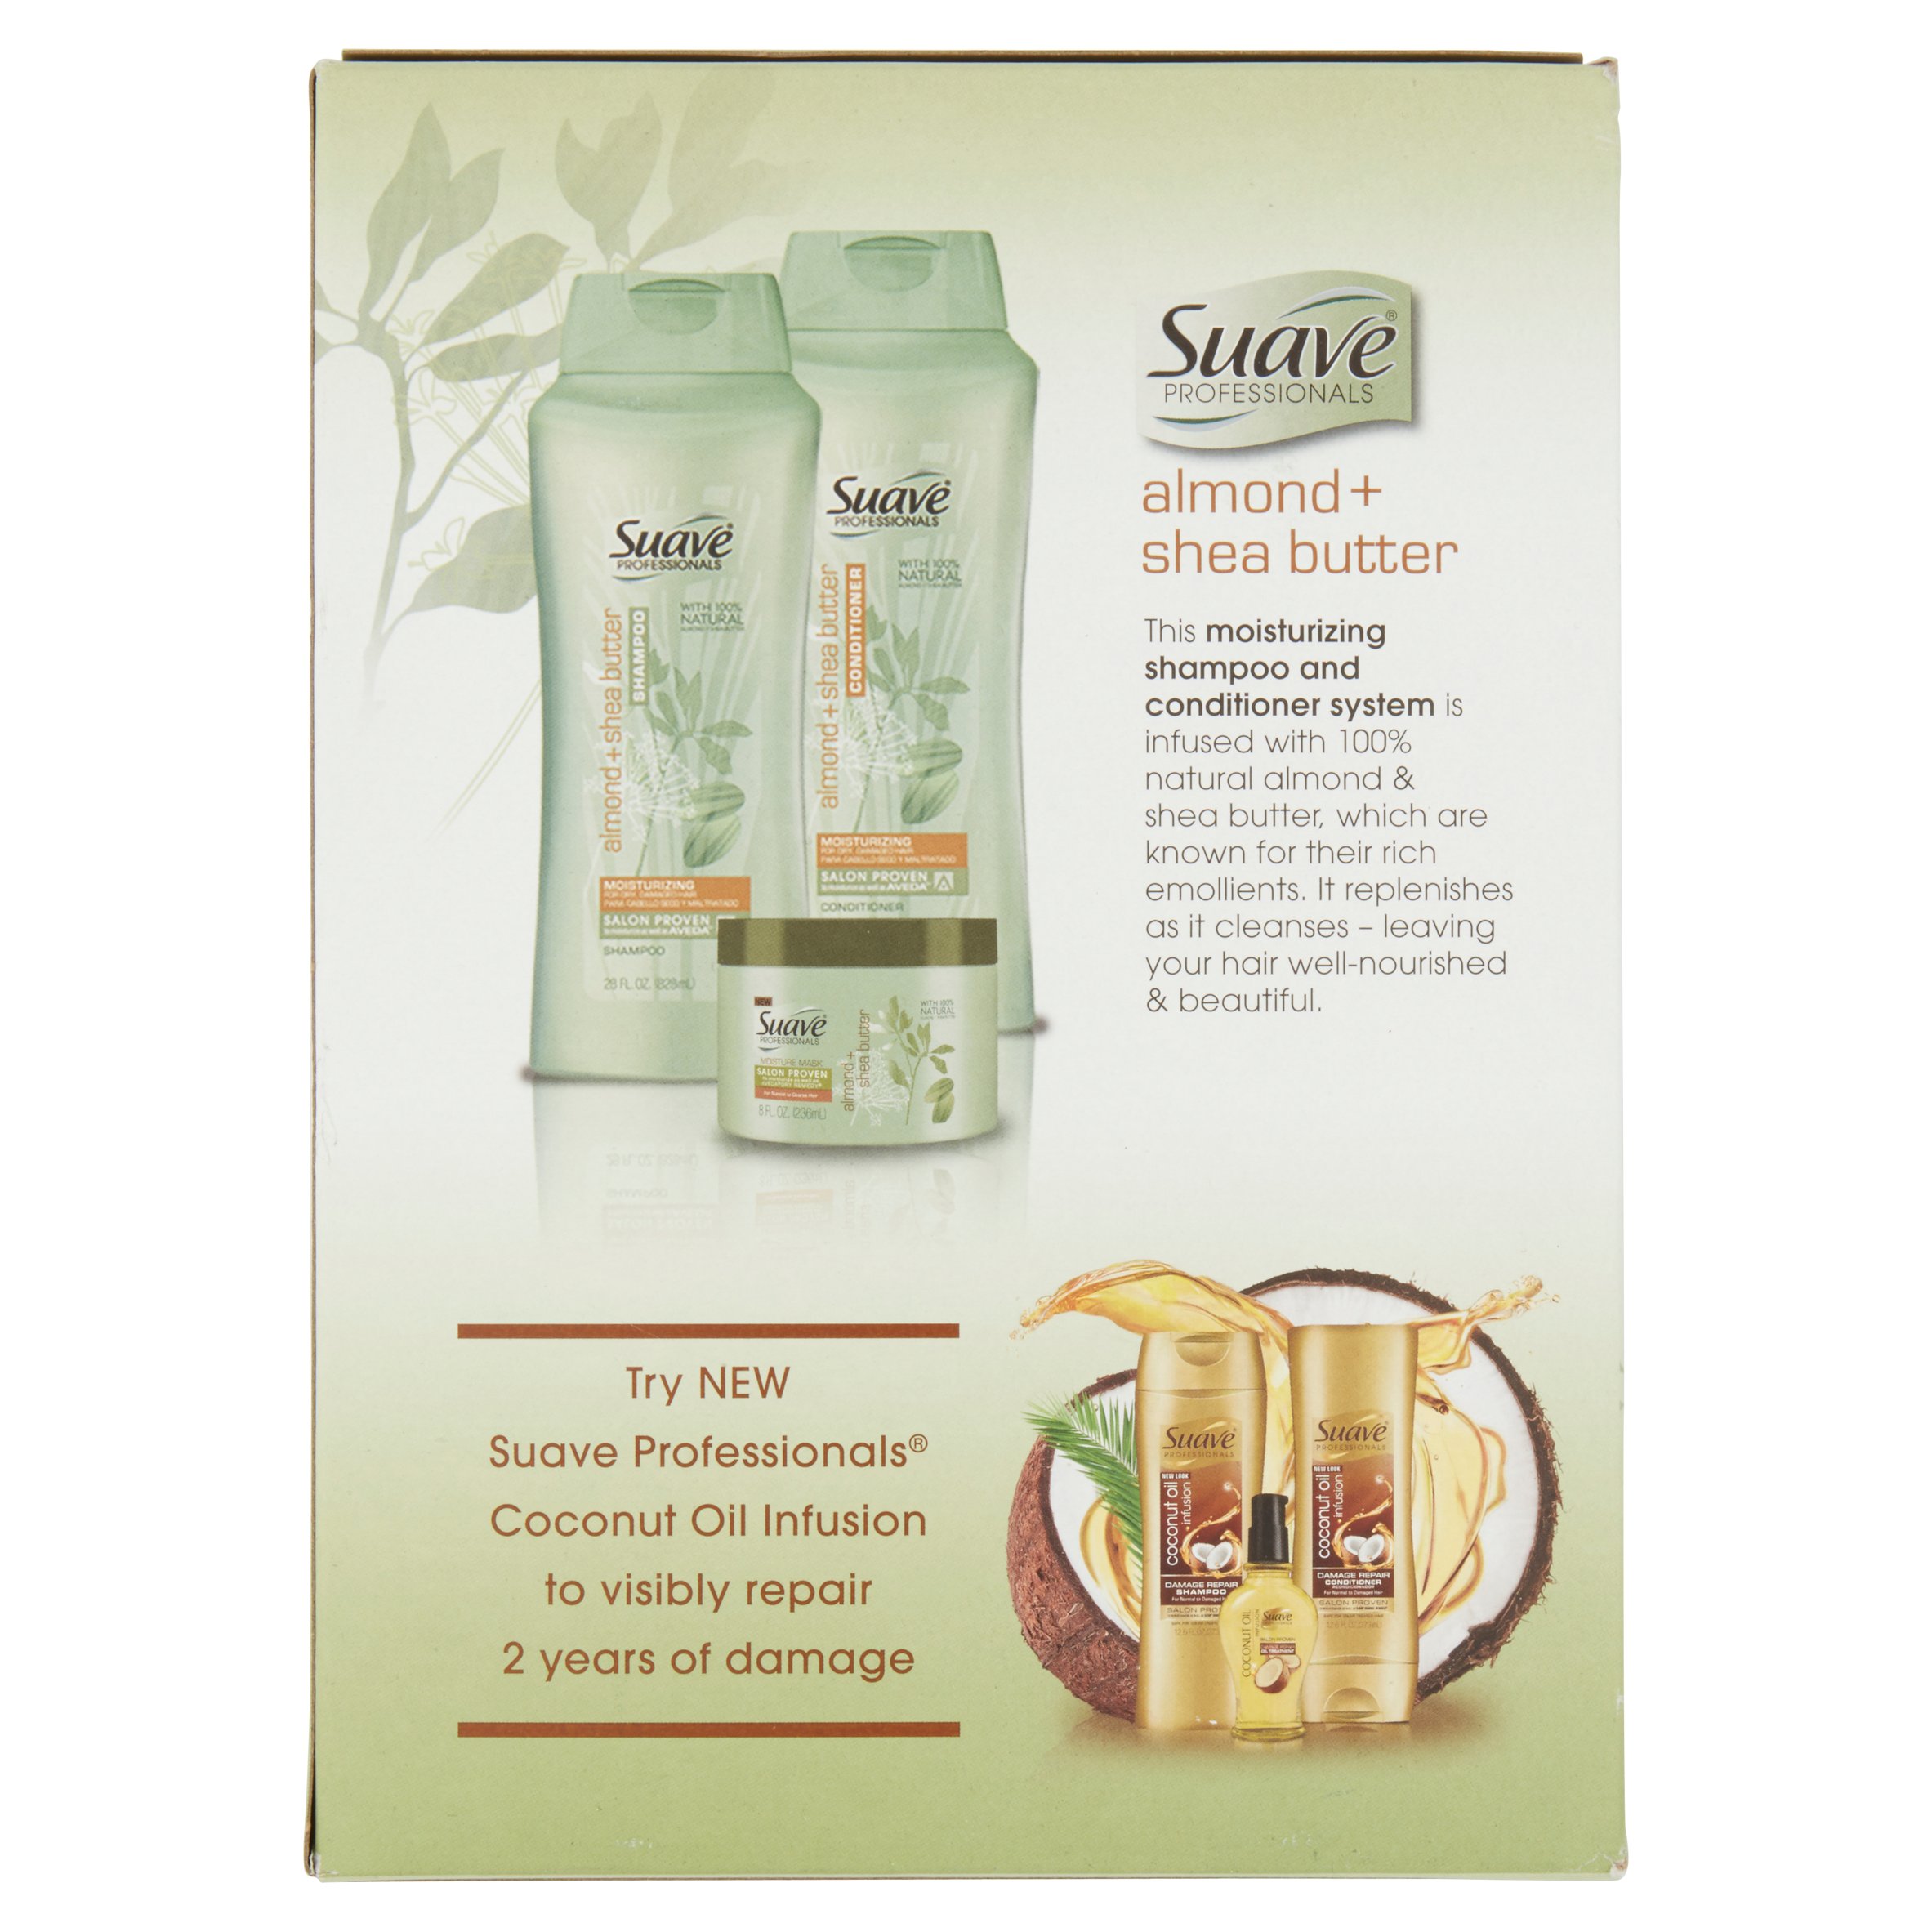 Suave 2-in-1 Shampoo & Conditioner, Almond and Shea Butter, 28 Oz, 2 Ct - image 4 of 6